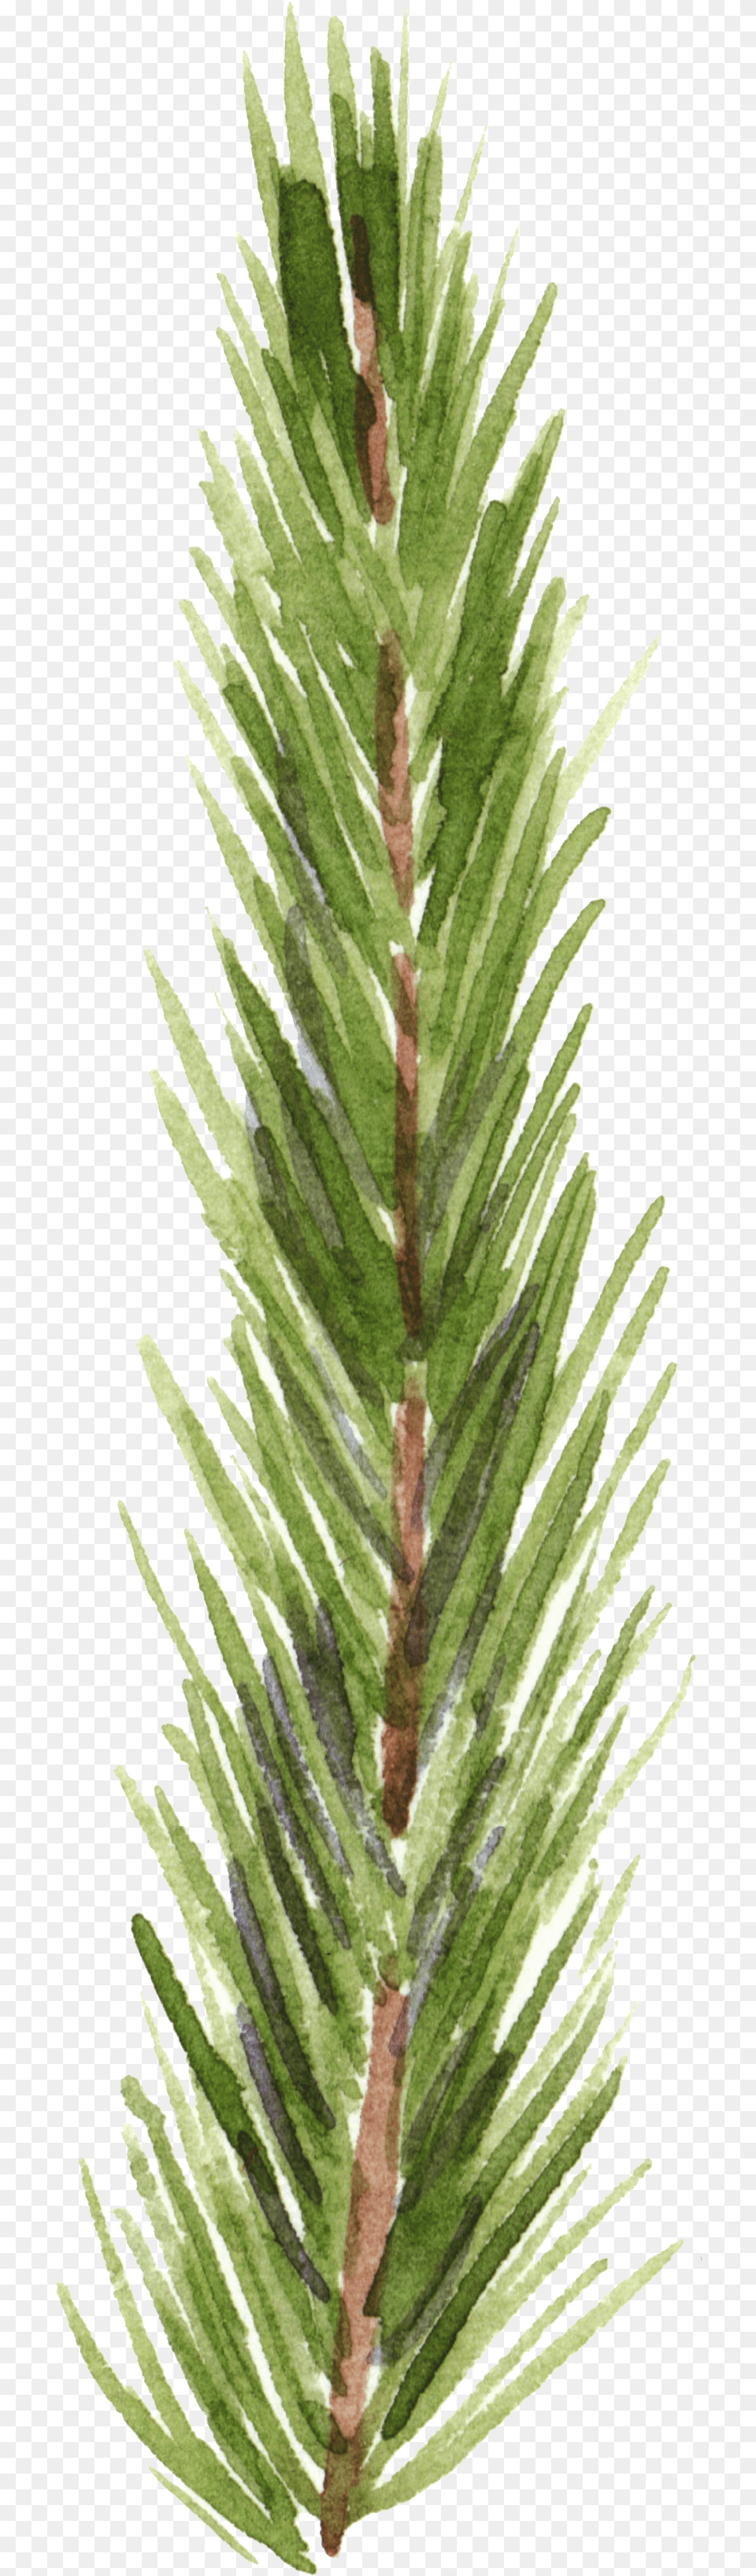 Hand Painted Realistic Pine Branches Transparent Decorative Redwood, Conifer, Fir, Grass, Plant Png Image